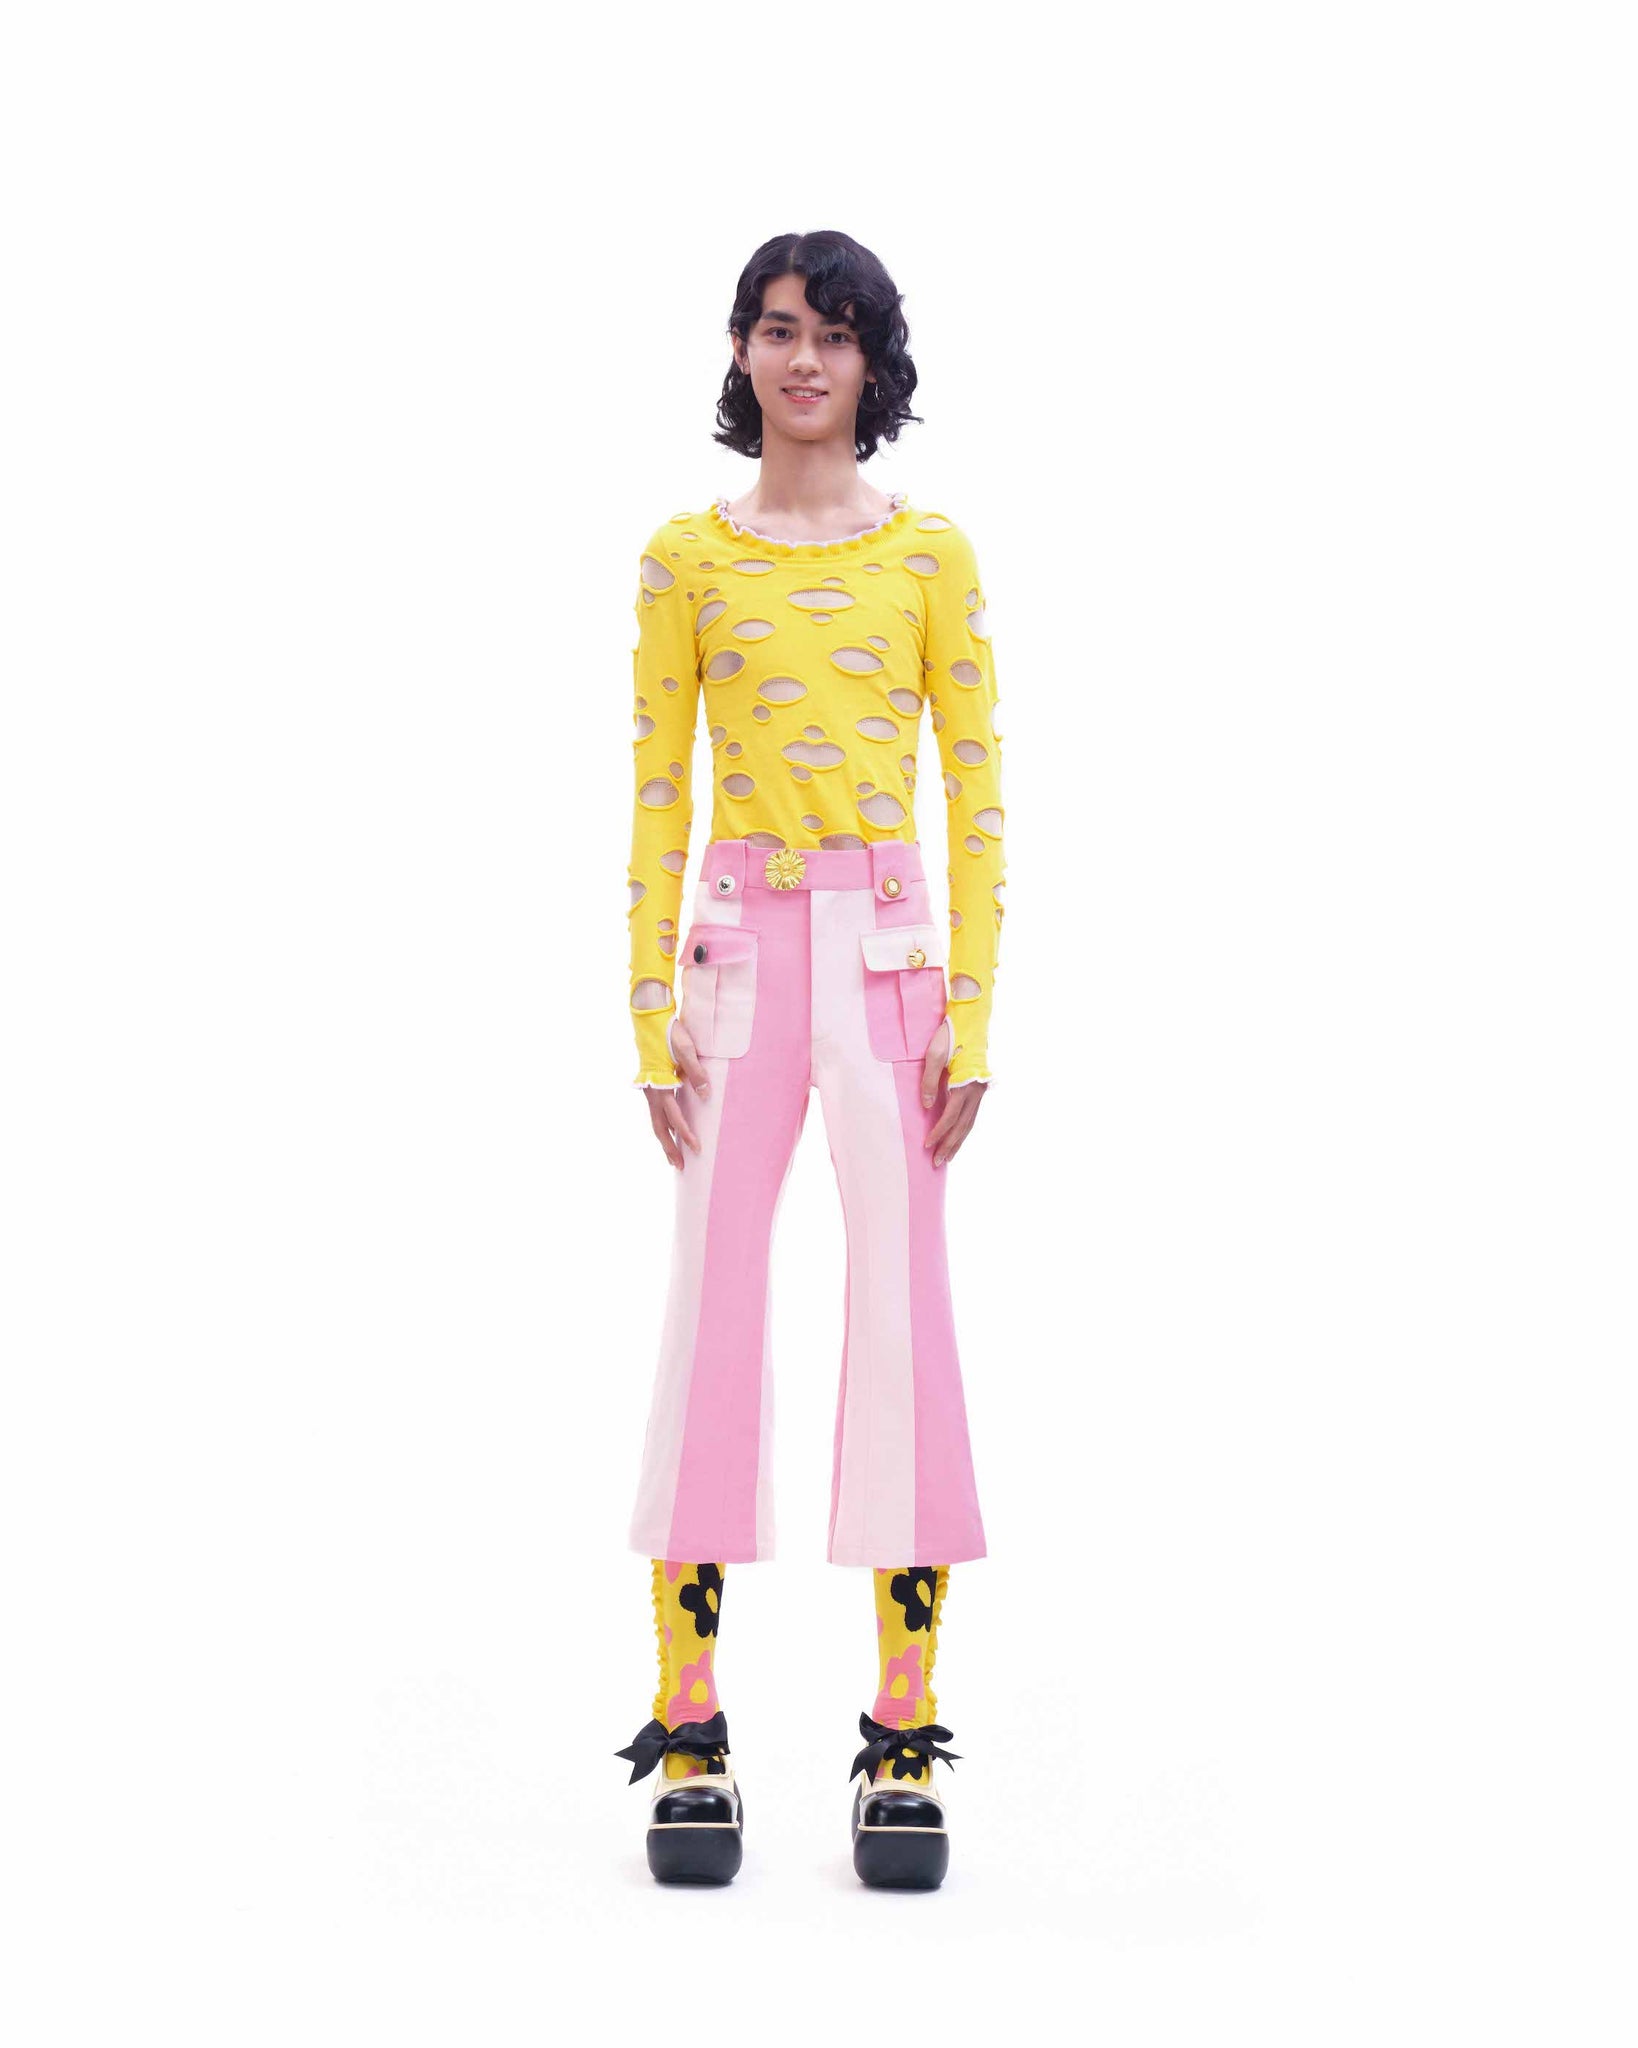 Load image into Gallery viewer, Big Girl Pants (Taffy Pink)
